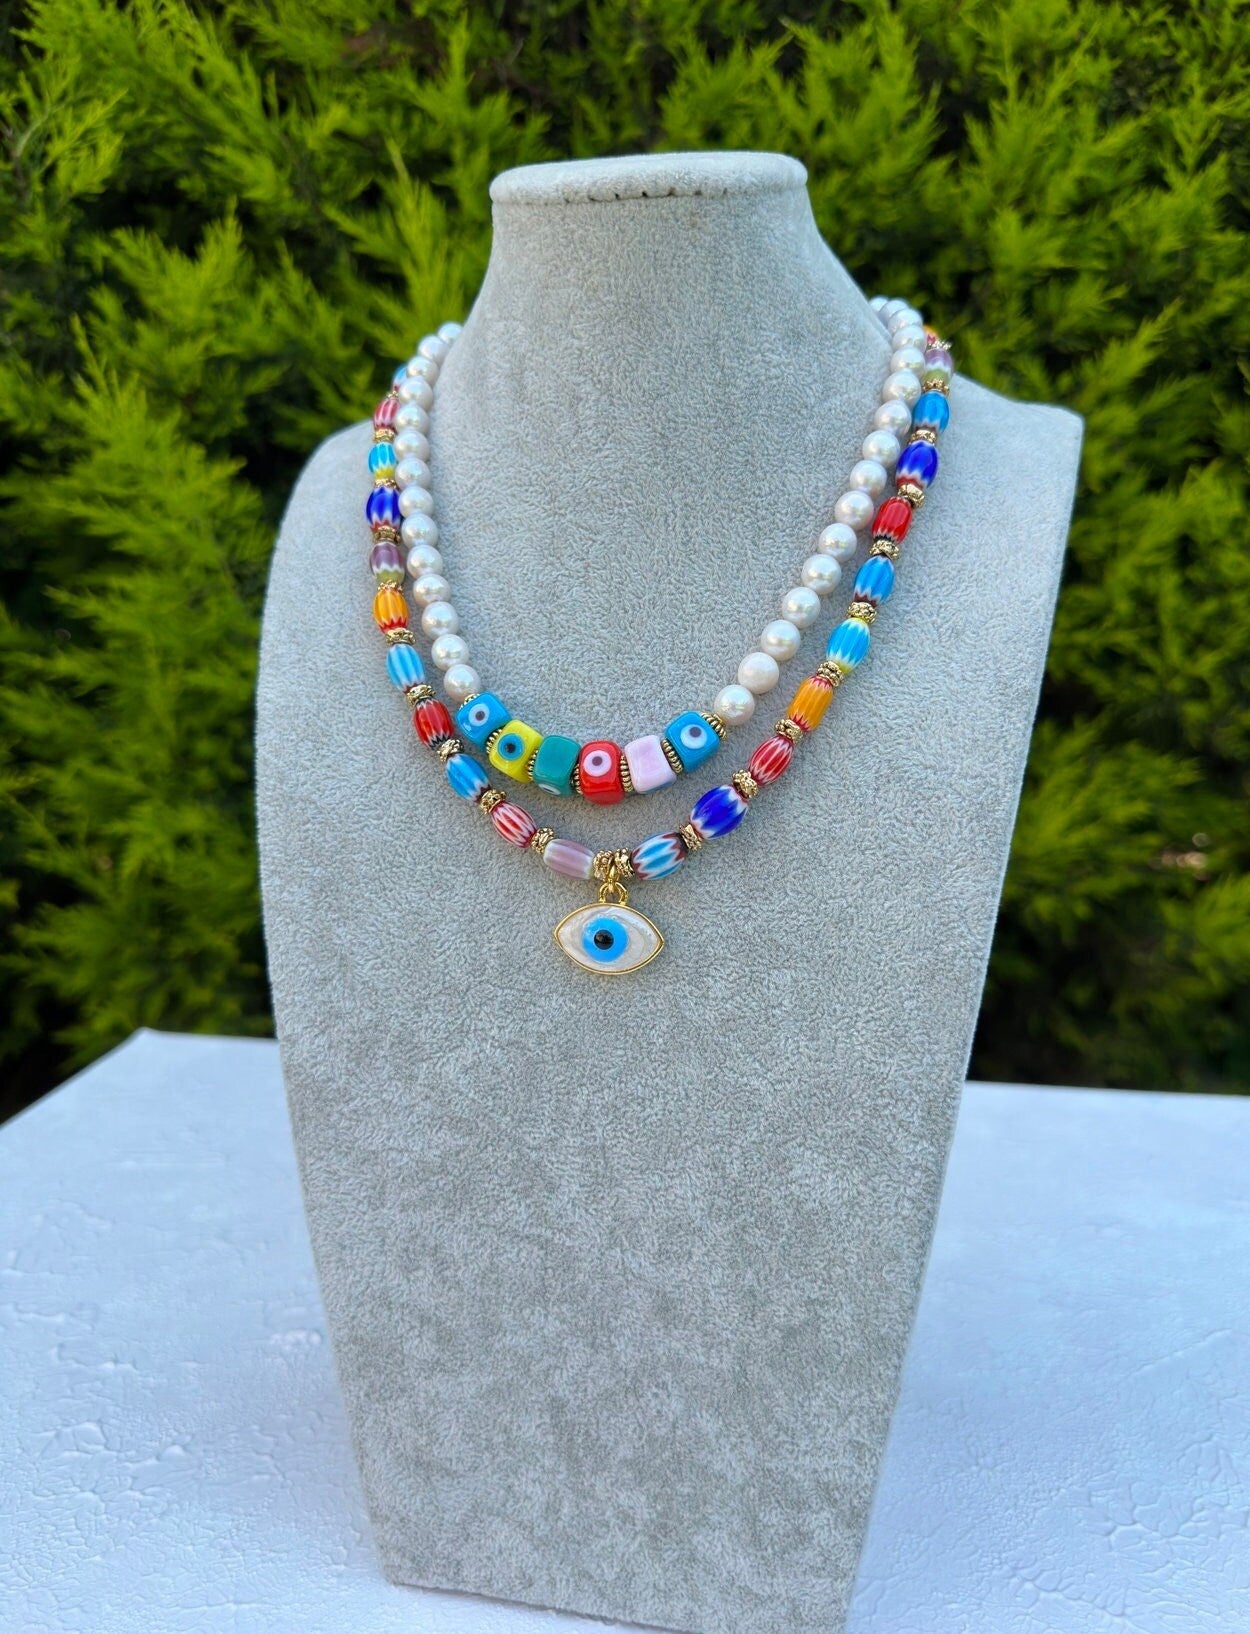 Pearl Necklace, Evil Eye Summer Jewelry, Birthday Gift for Friend, Colorful Handmade Necklace, Statement Jewelry